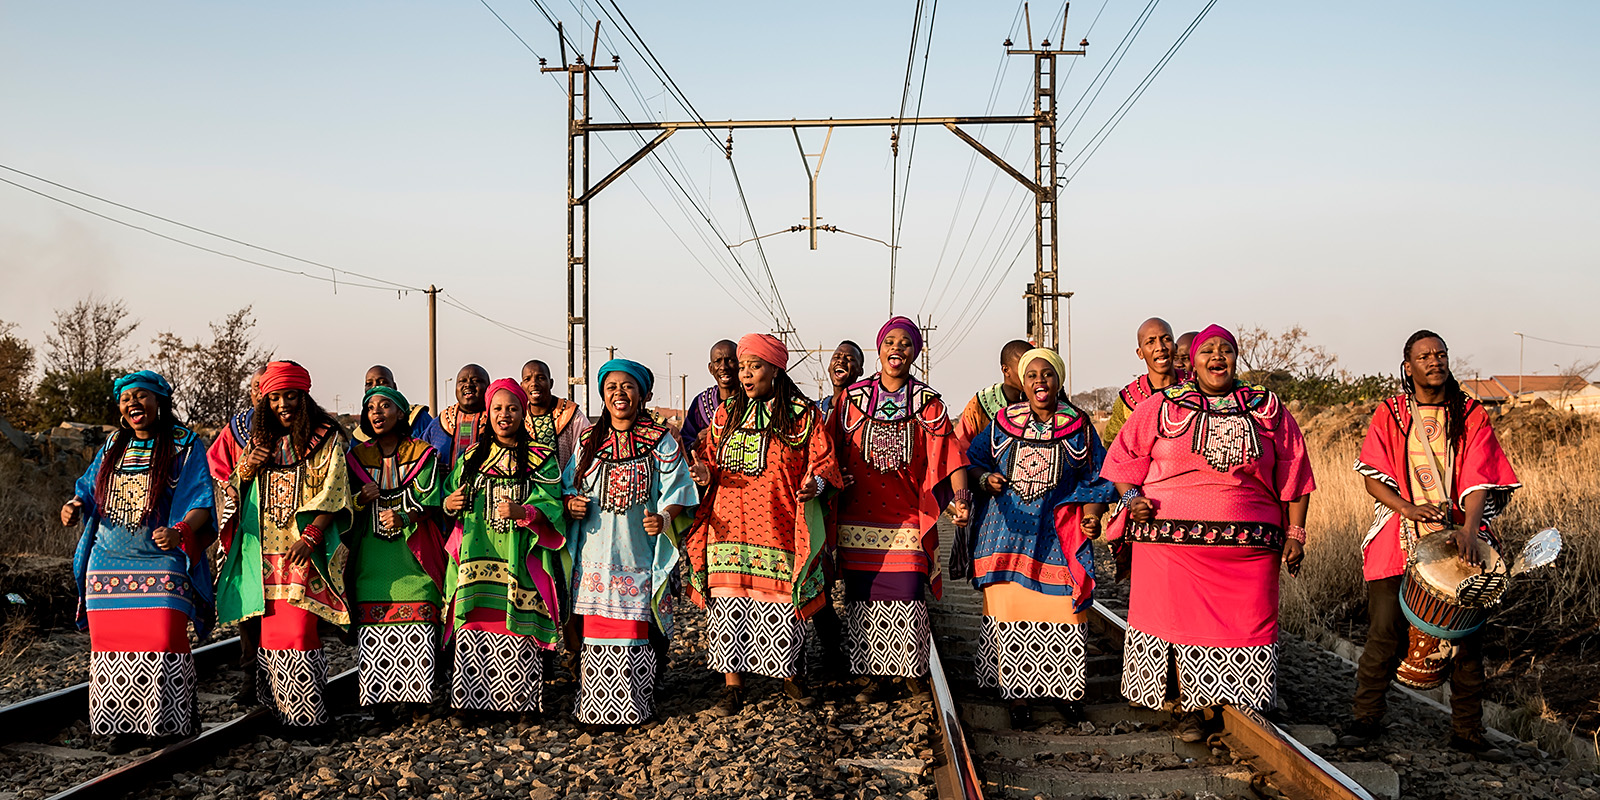 Men and women in colorful clothing sing while standing on railroad tracks